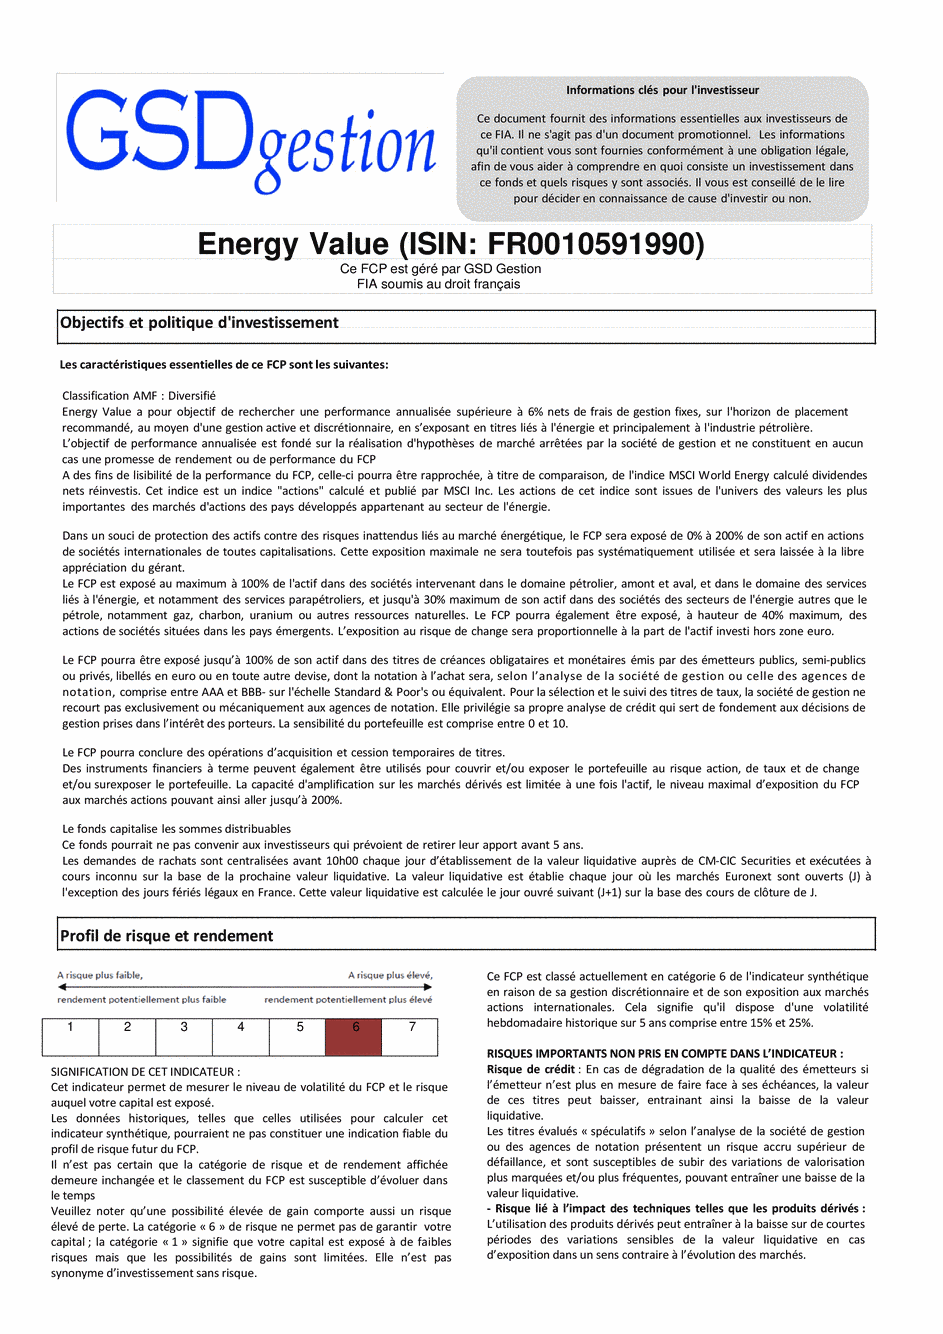 DICI-Prospectus Complet Energy Value - 08/01/2015 - French